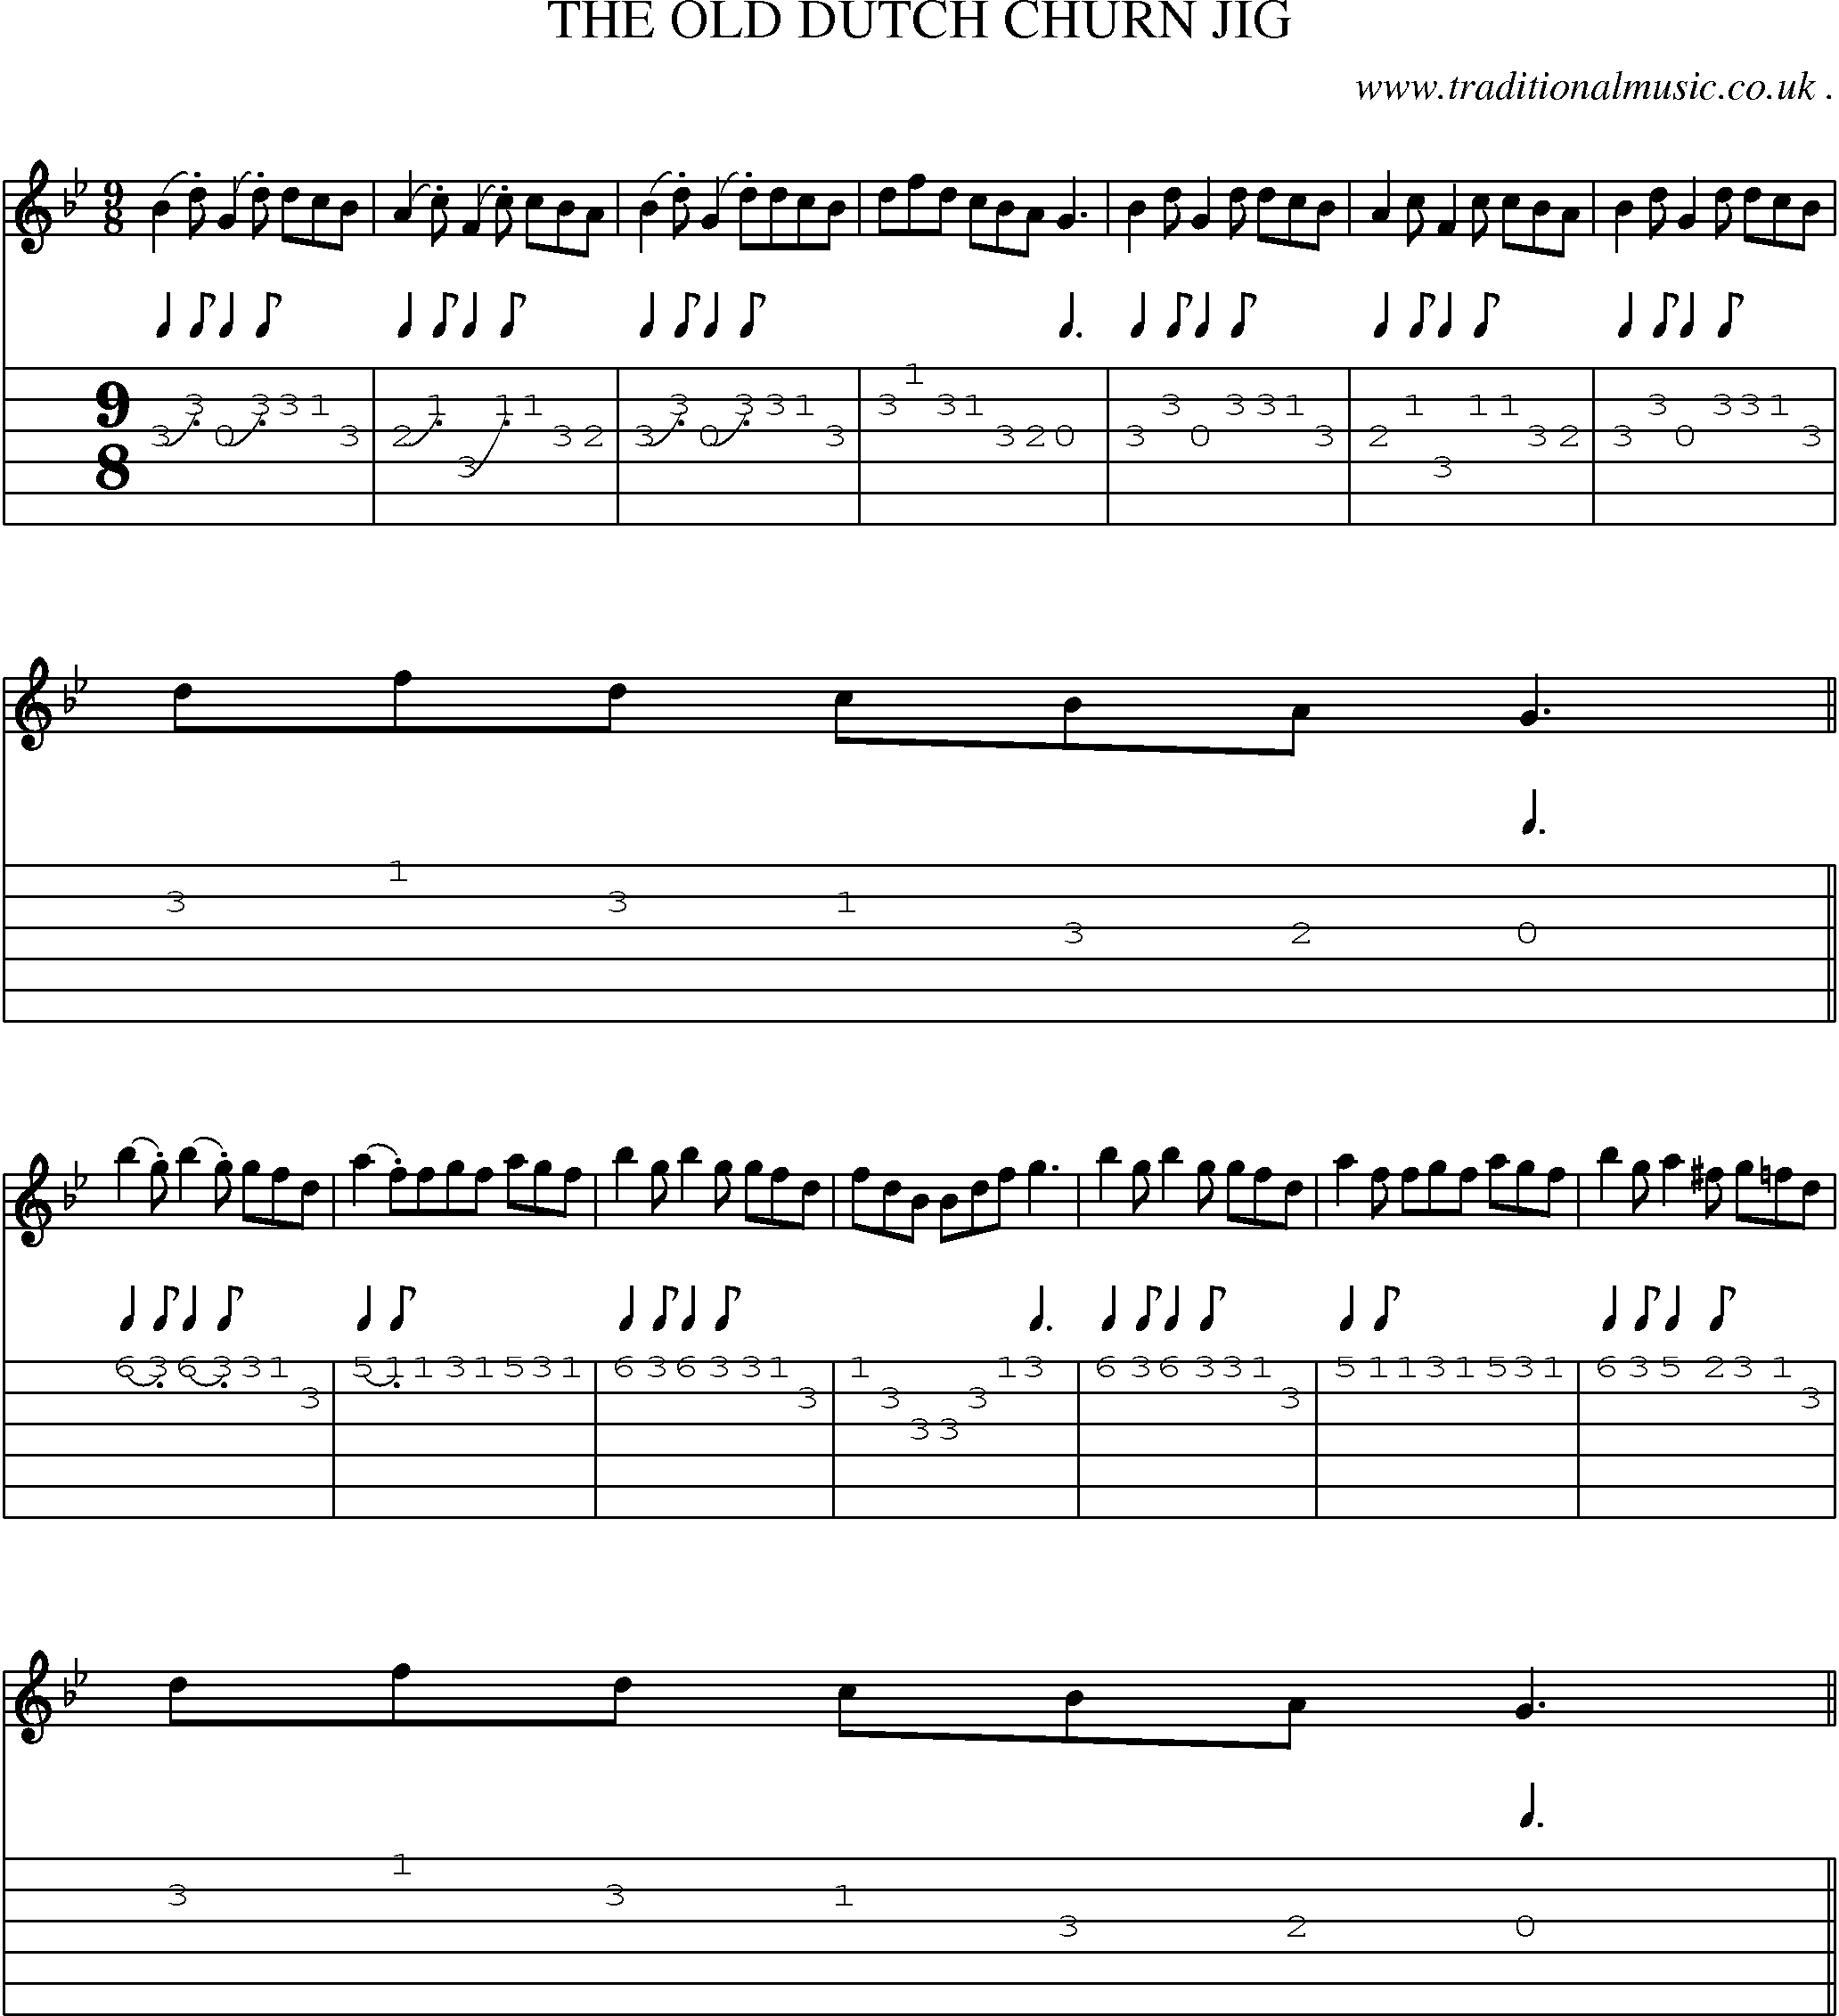 Sheet-Music and Guitar Tabs for The Old Dutch Churn Jig